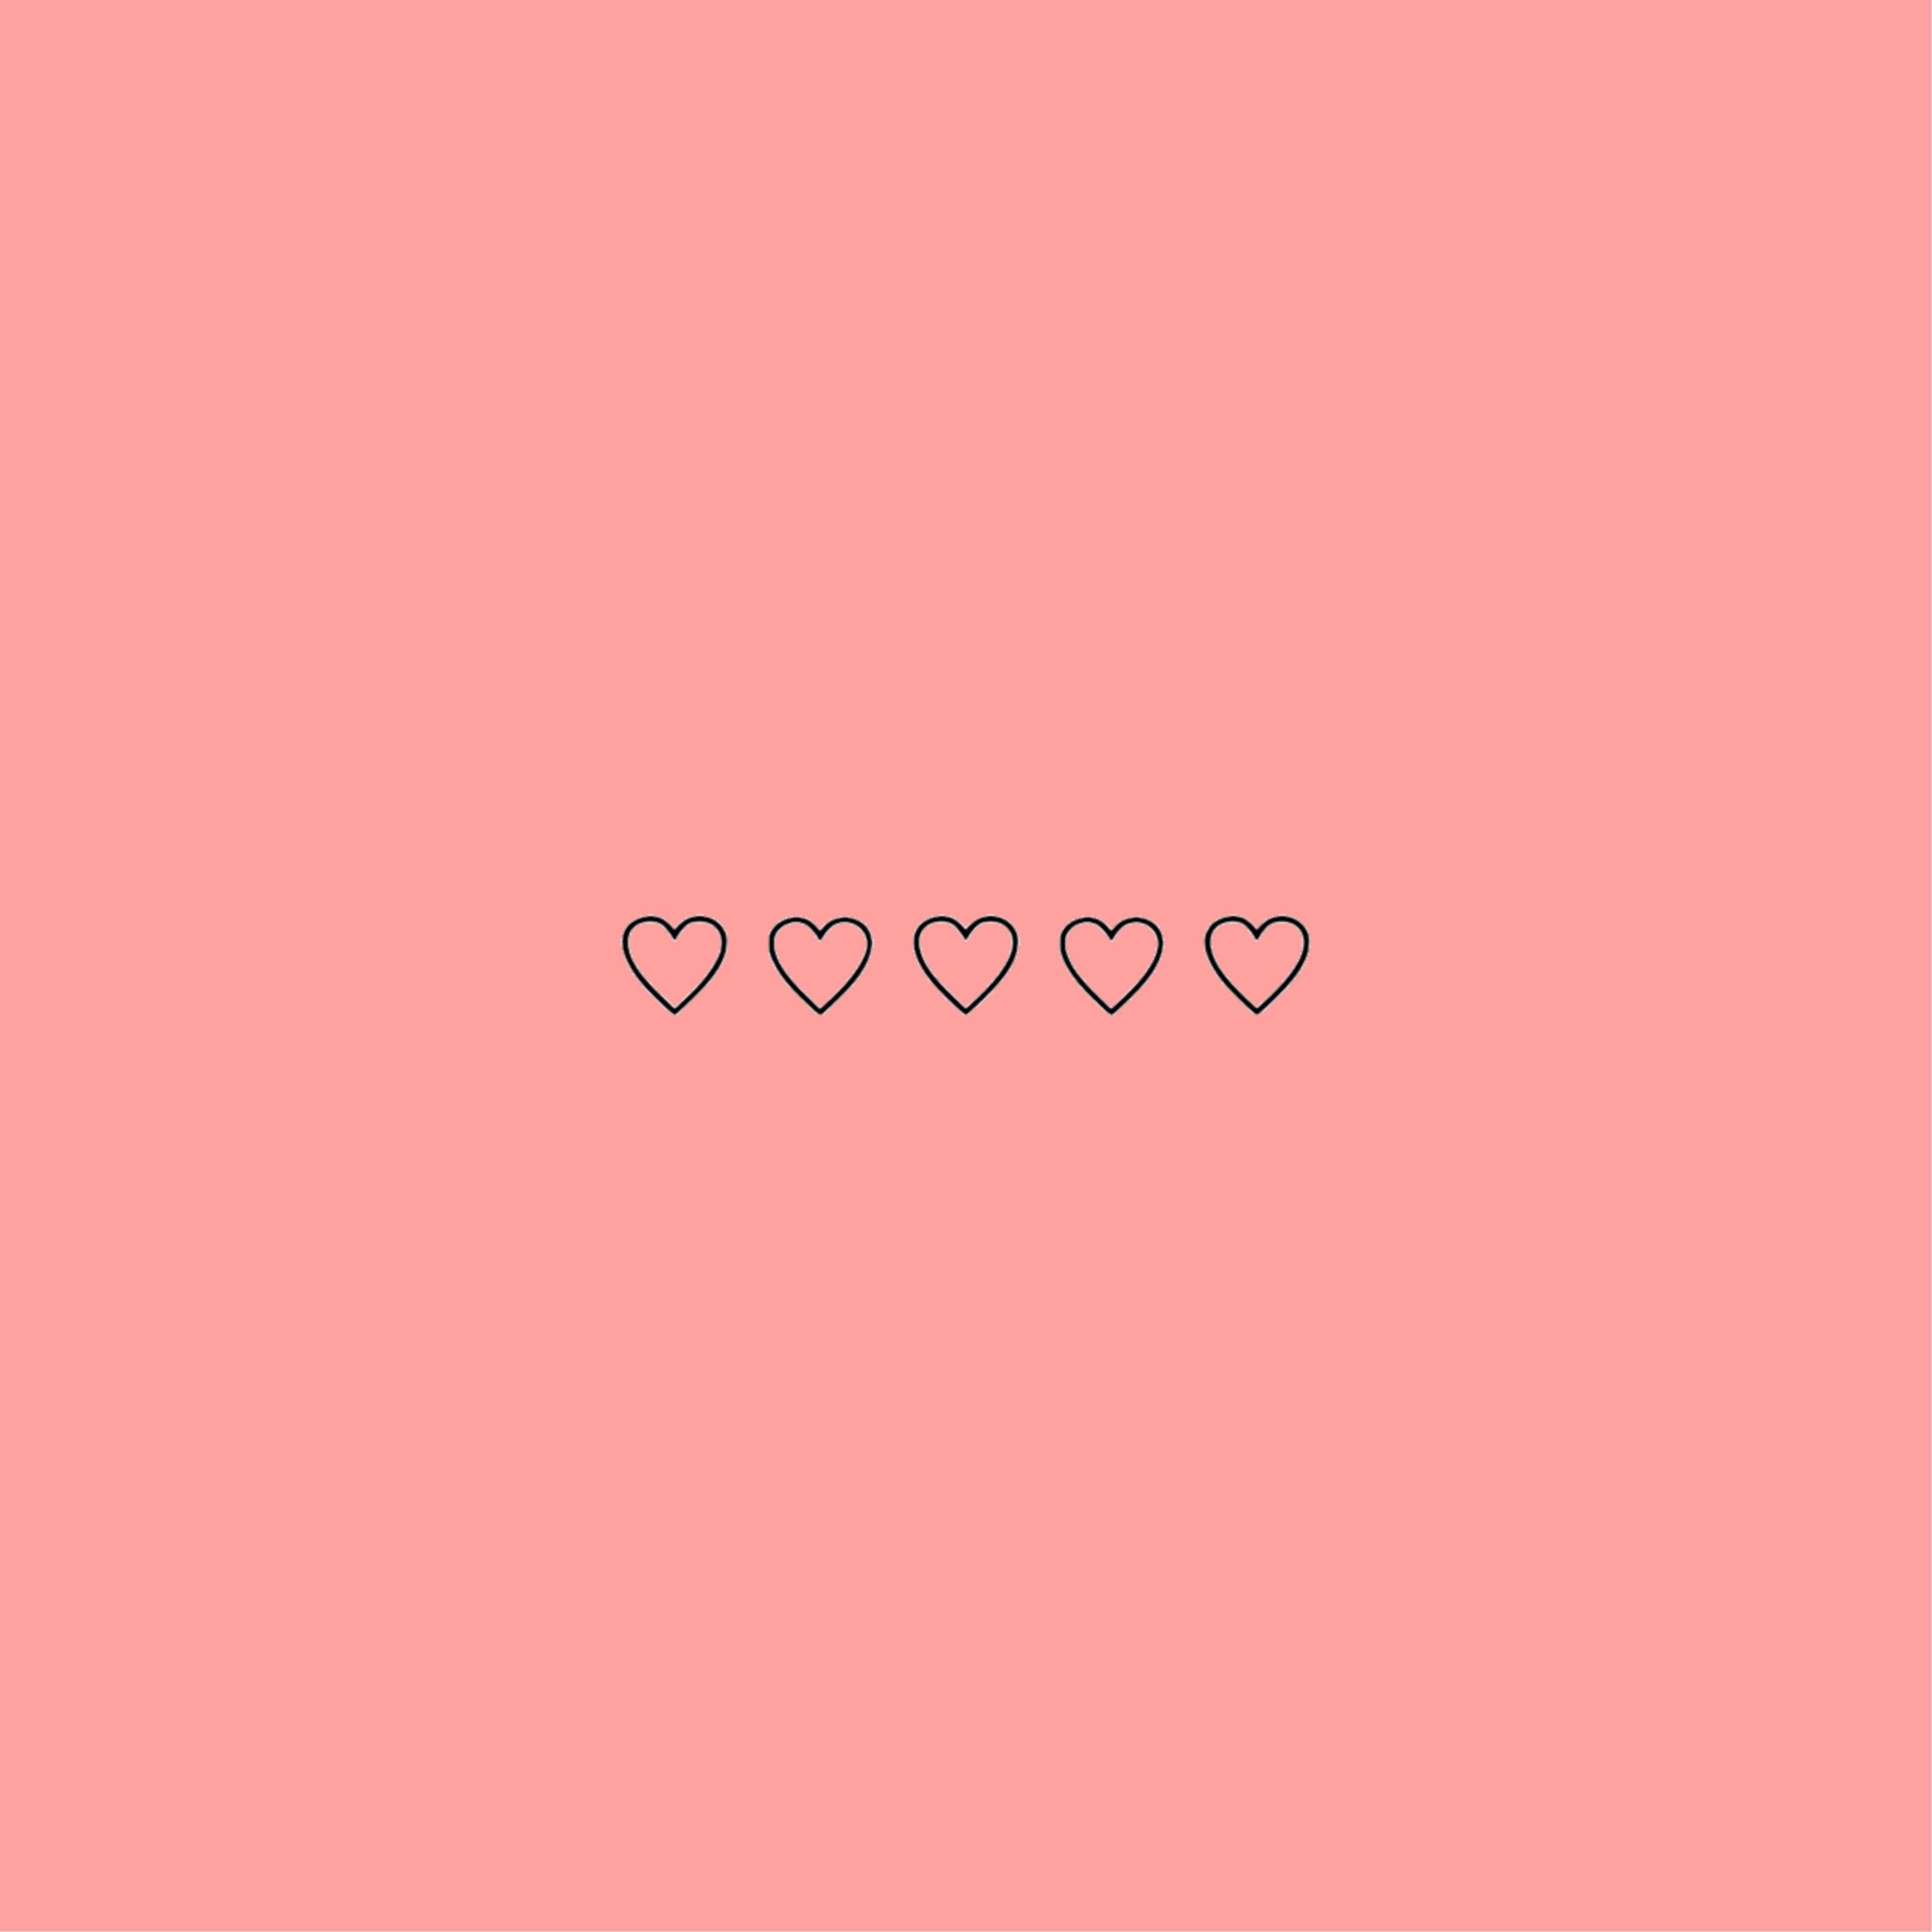 4 hearts on a pink background - Pastel pink, pink heart